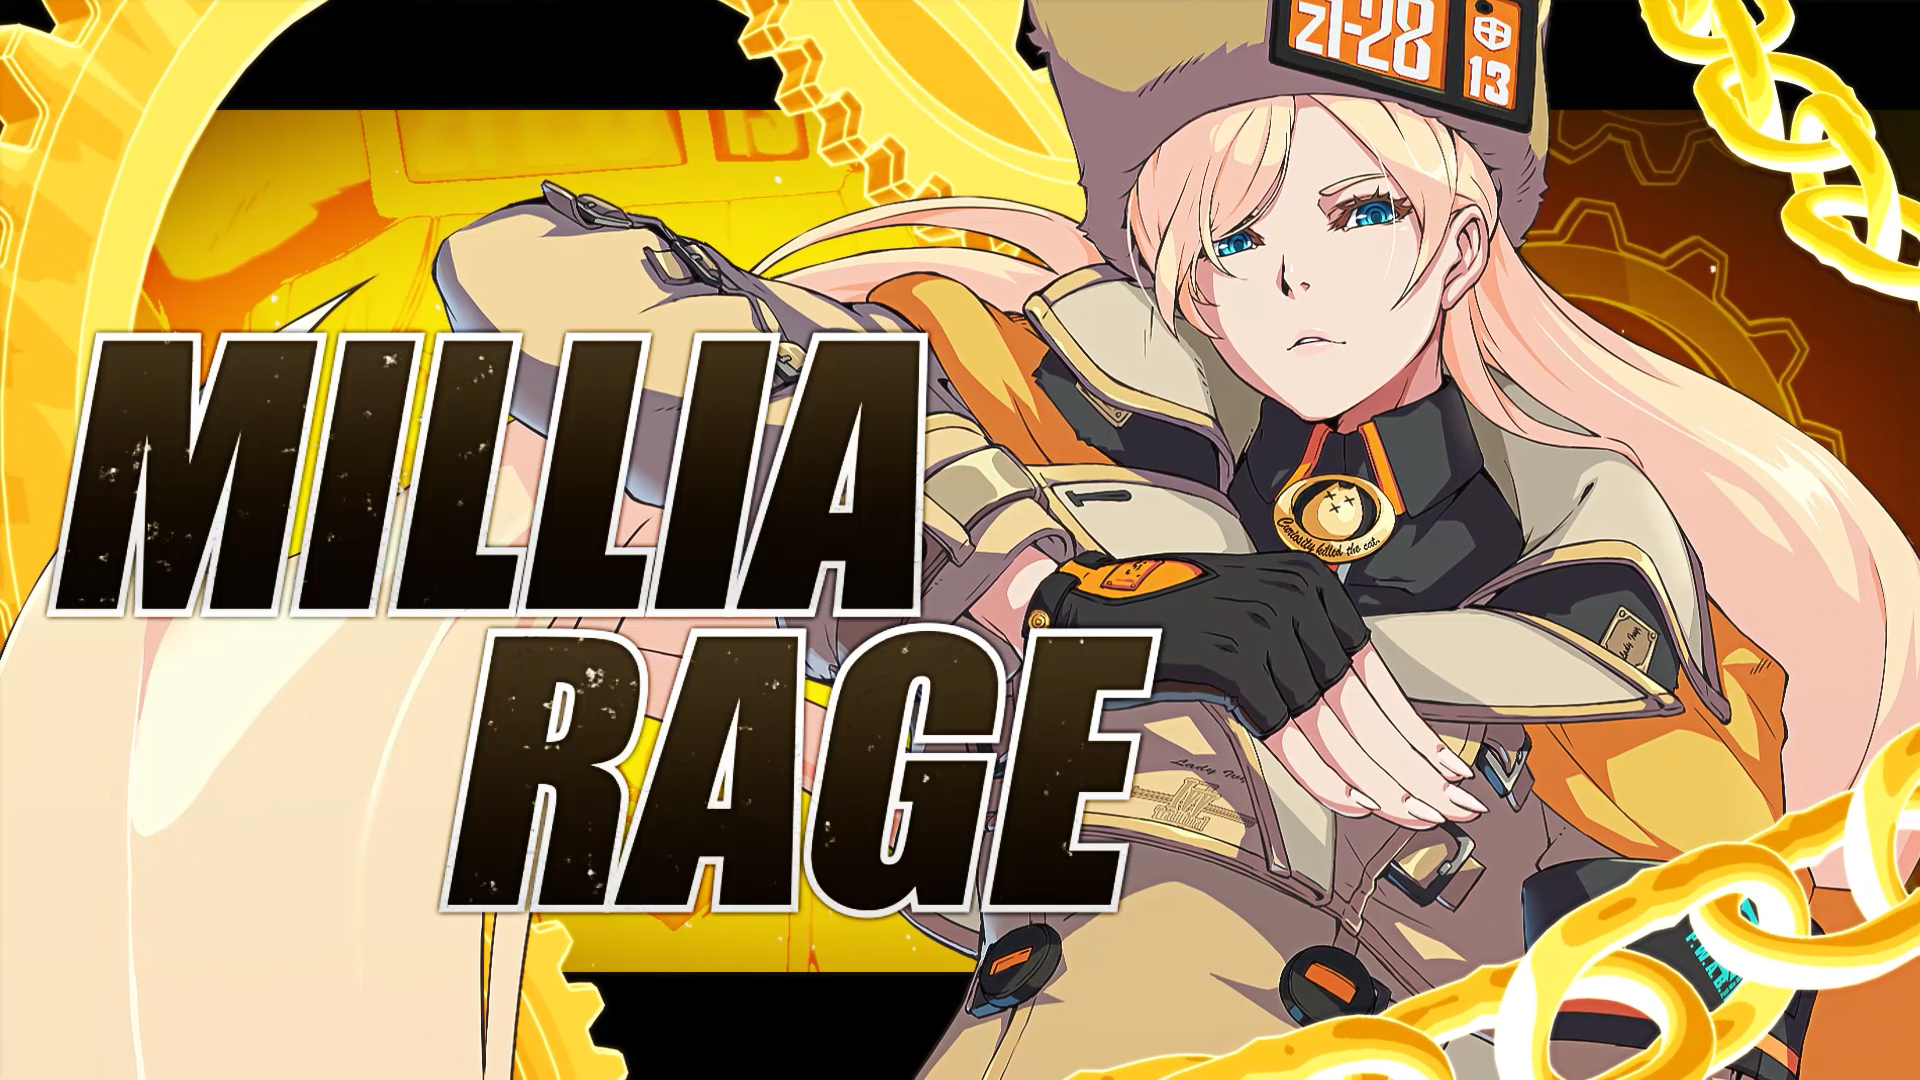 Latest Guilty Gear Strive Trailer featuring Millia Rage and Zato=1